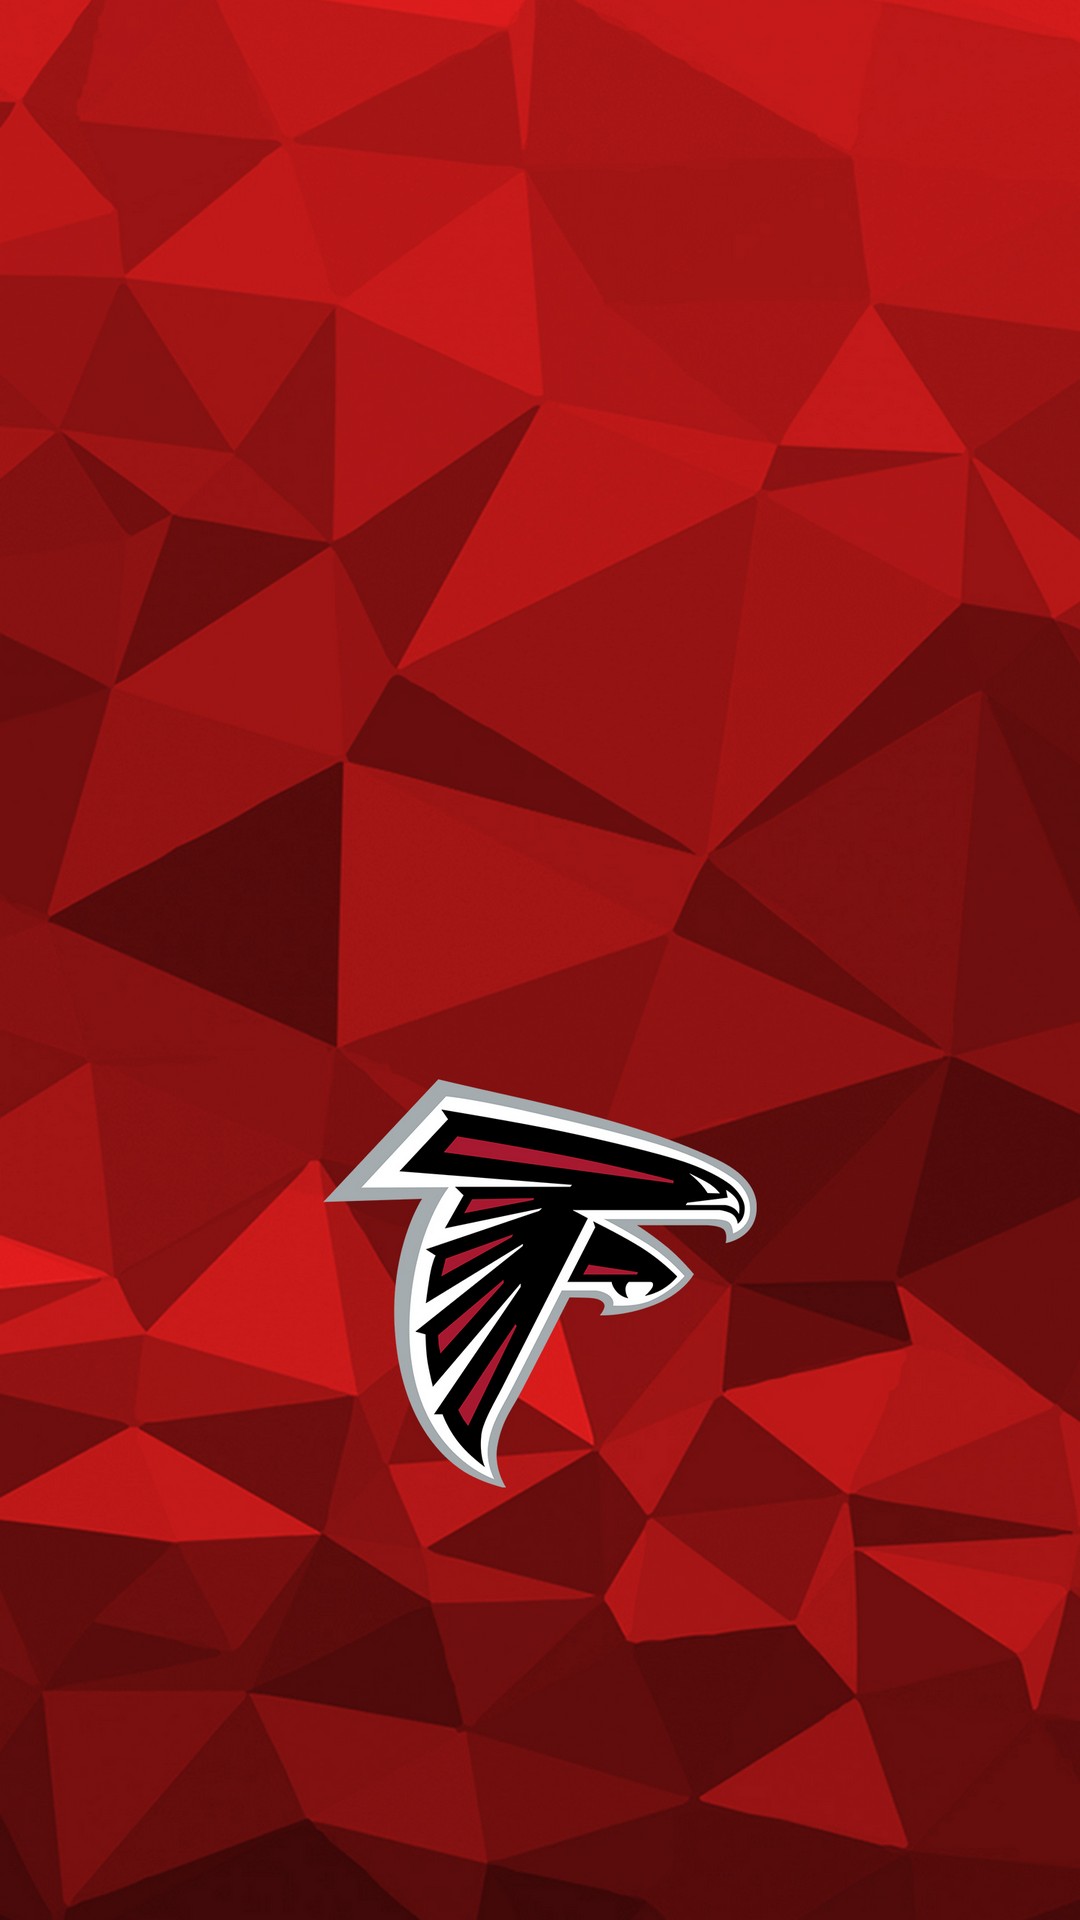 Atlanta Falcons iPhone Wallpaper High Quality with high-resolution 1080x1920 pixel. Donwload and set as wallpaper for your iPhone X, iPhone XS home screen backgrounds, XS Max, XR, iPhone8 lock screen wallpaper, iPhone 7, 6, SE and other mobile devices